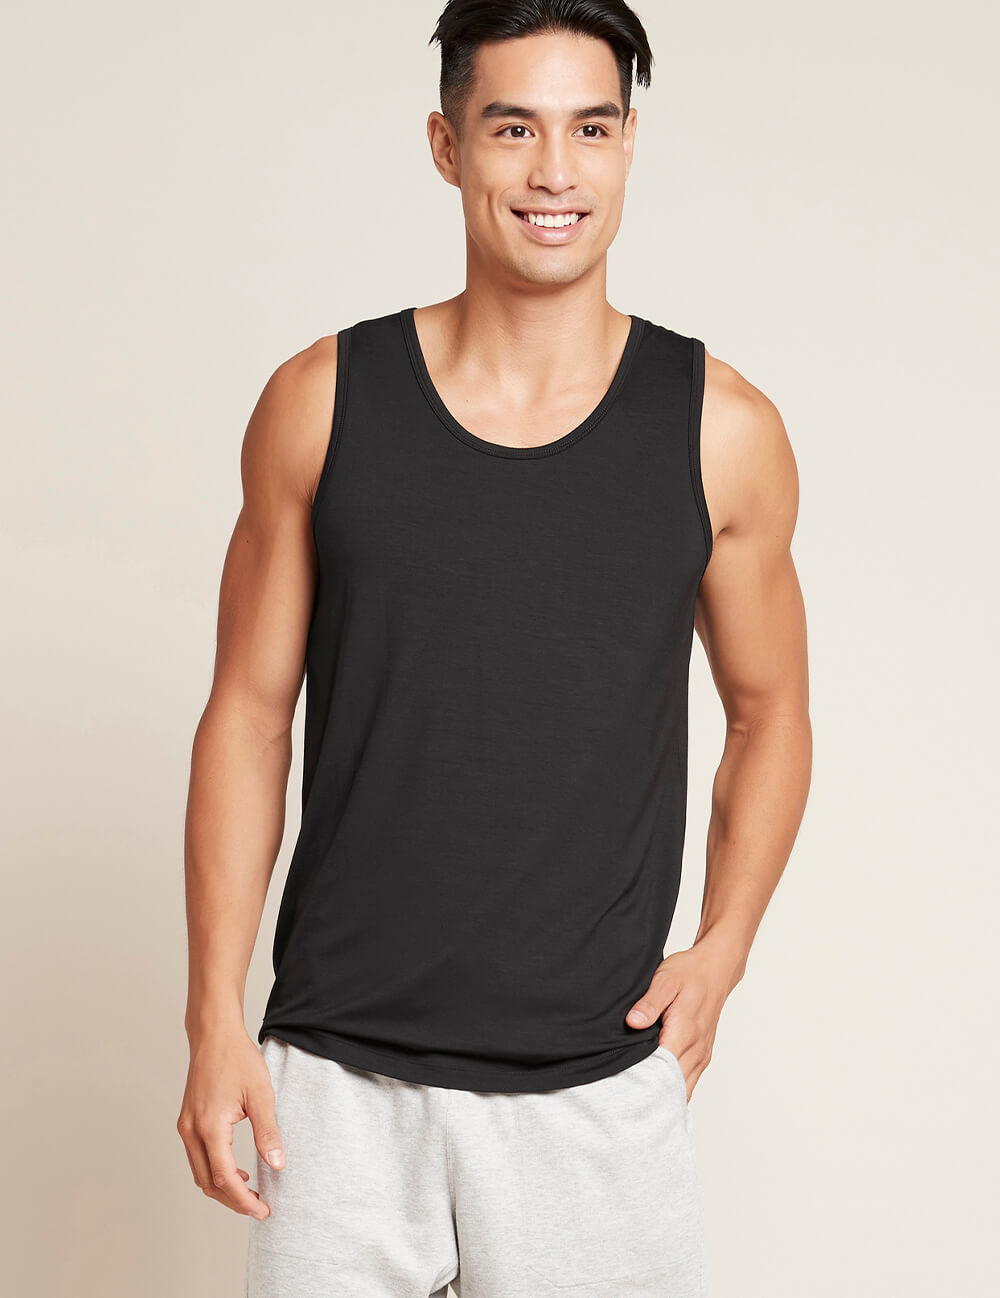 Boody Bamboo Men's Tank Top in Black Front View